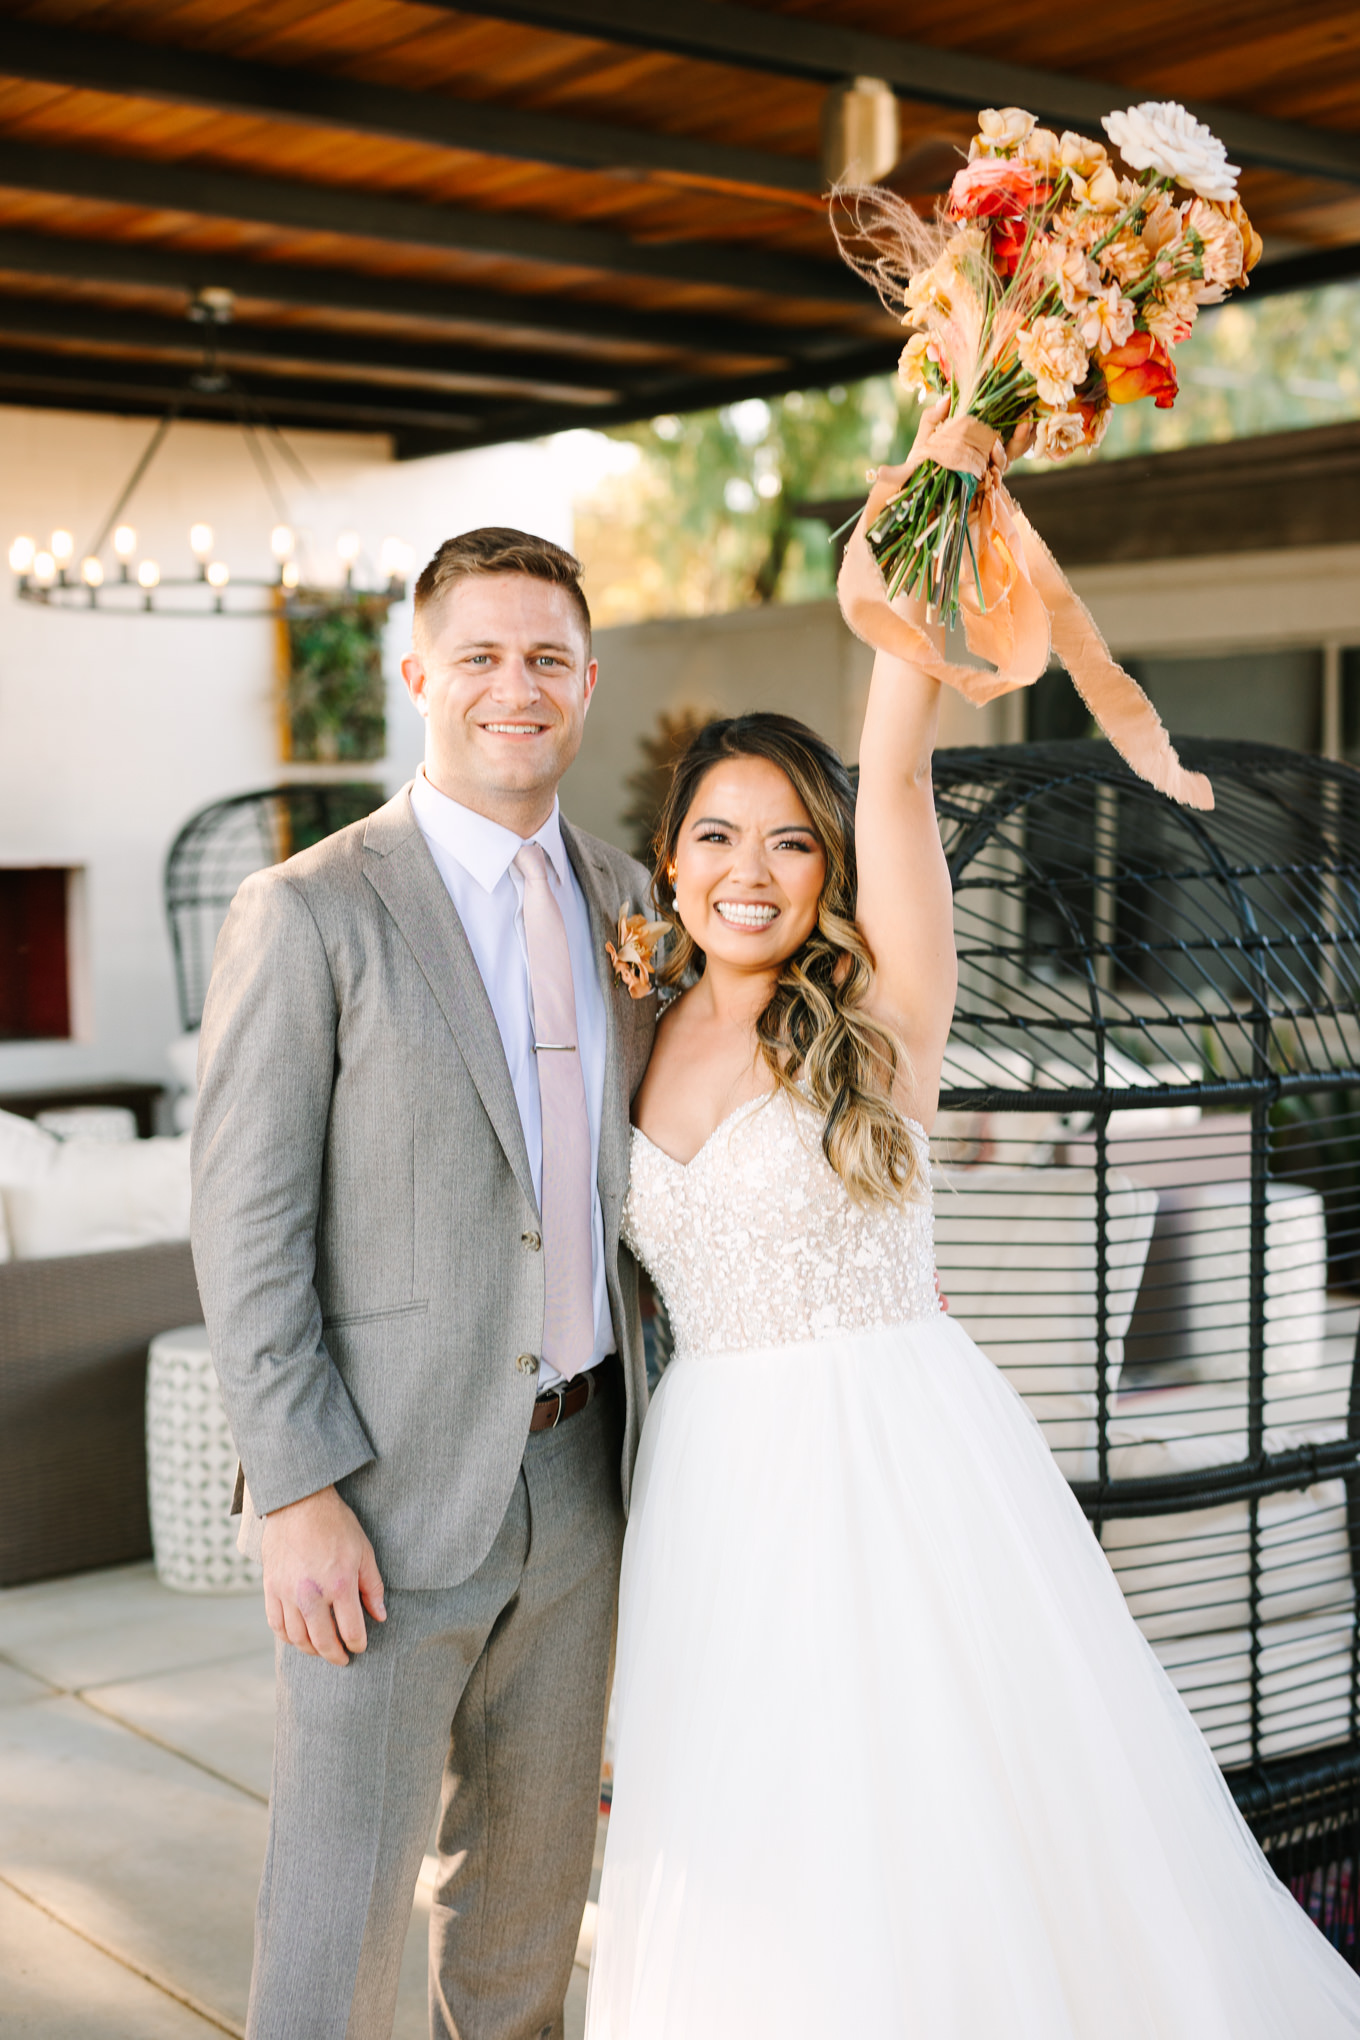 Bride and groom right after ceremony | Pink and orange Lautner Compound wedding | Colorful Palm Springs wedding photography | #palmspringsphotographer #palmspringswedding #lautnercompound #southerncaliforniawedding  Source: Mary Costa Photography | Los Angeles